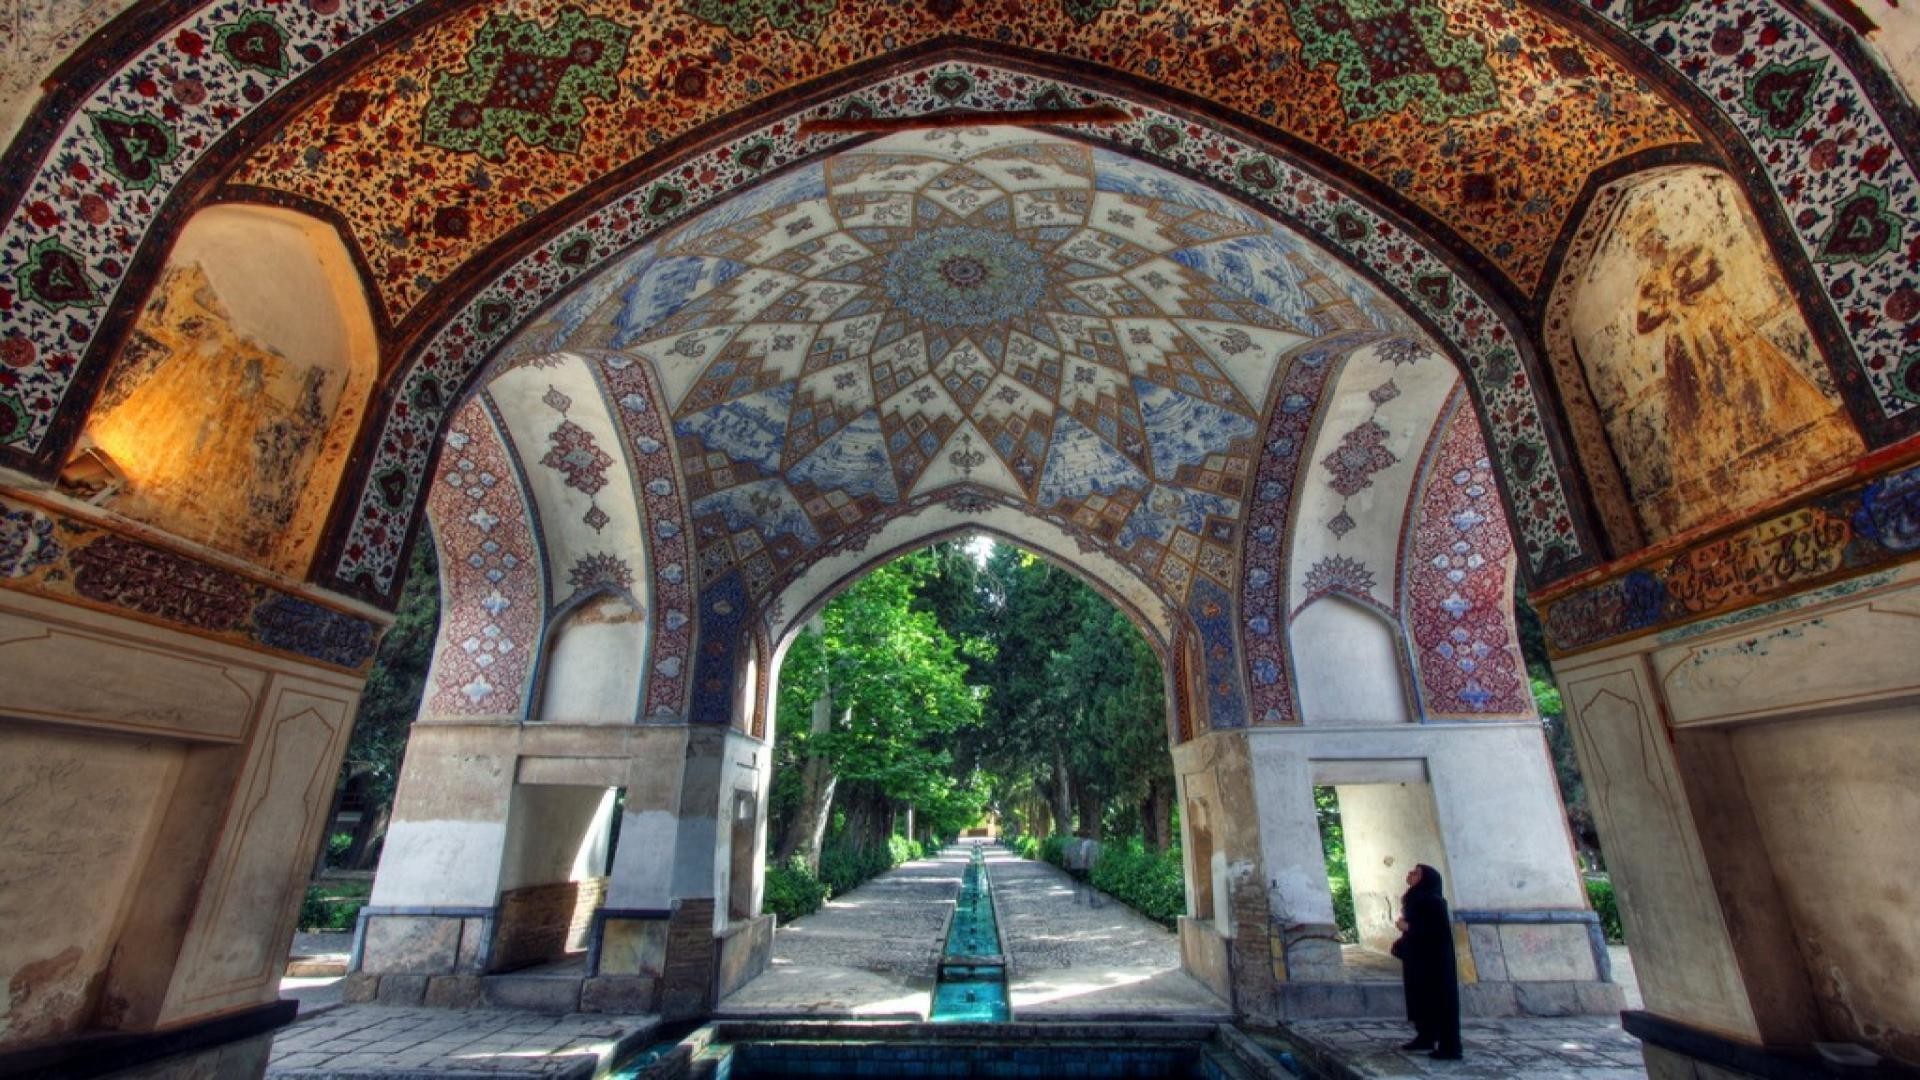 100+ Iran Pictures | Download Free Images on Unsplash